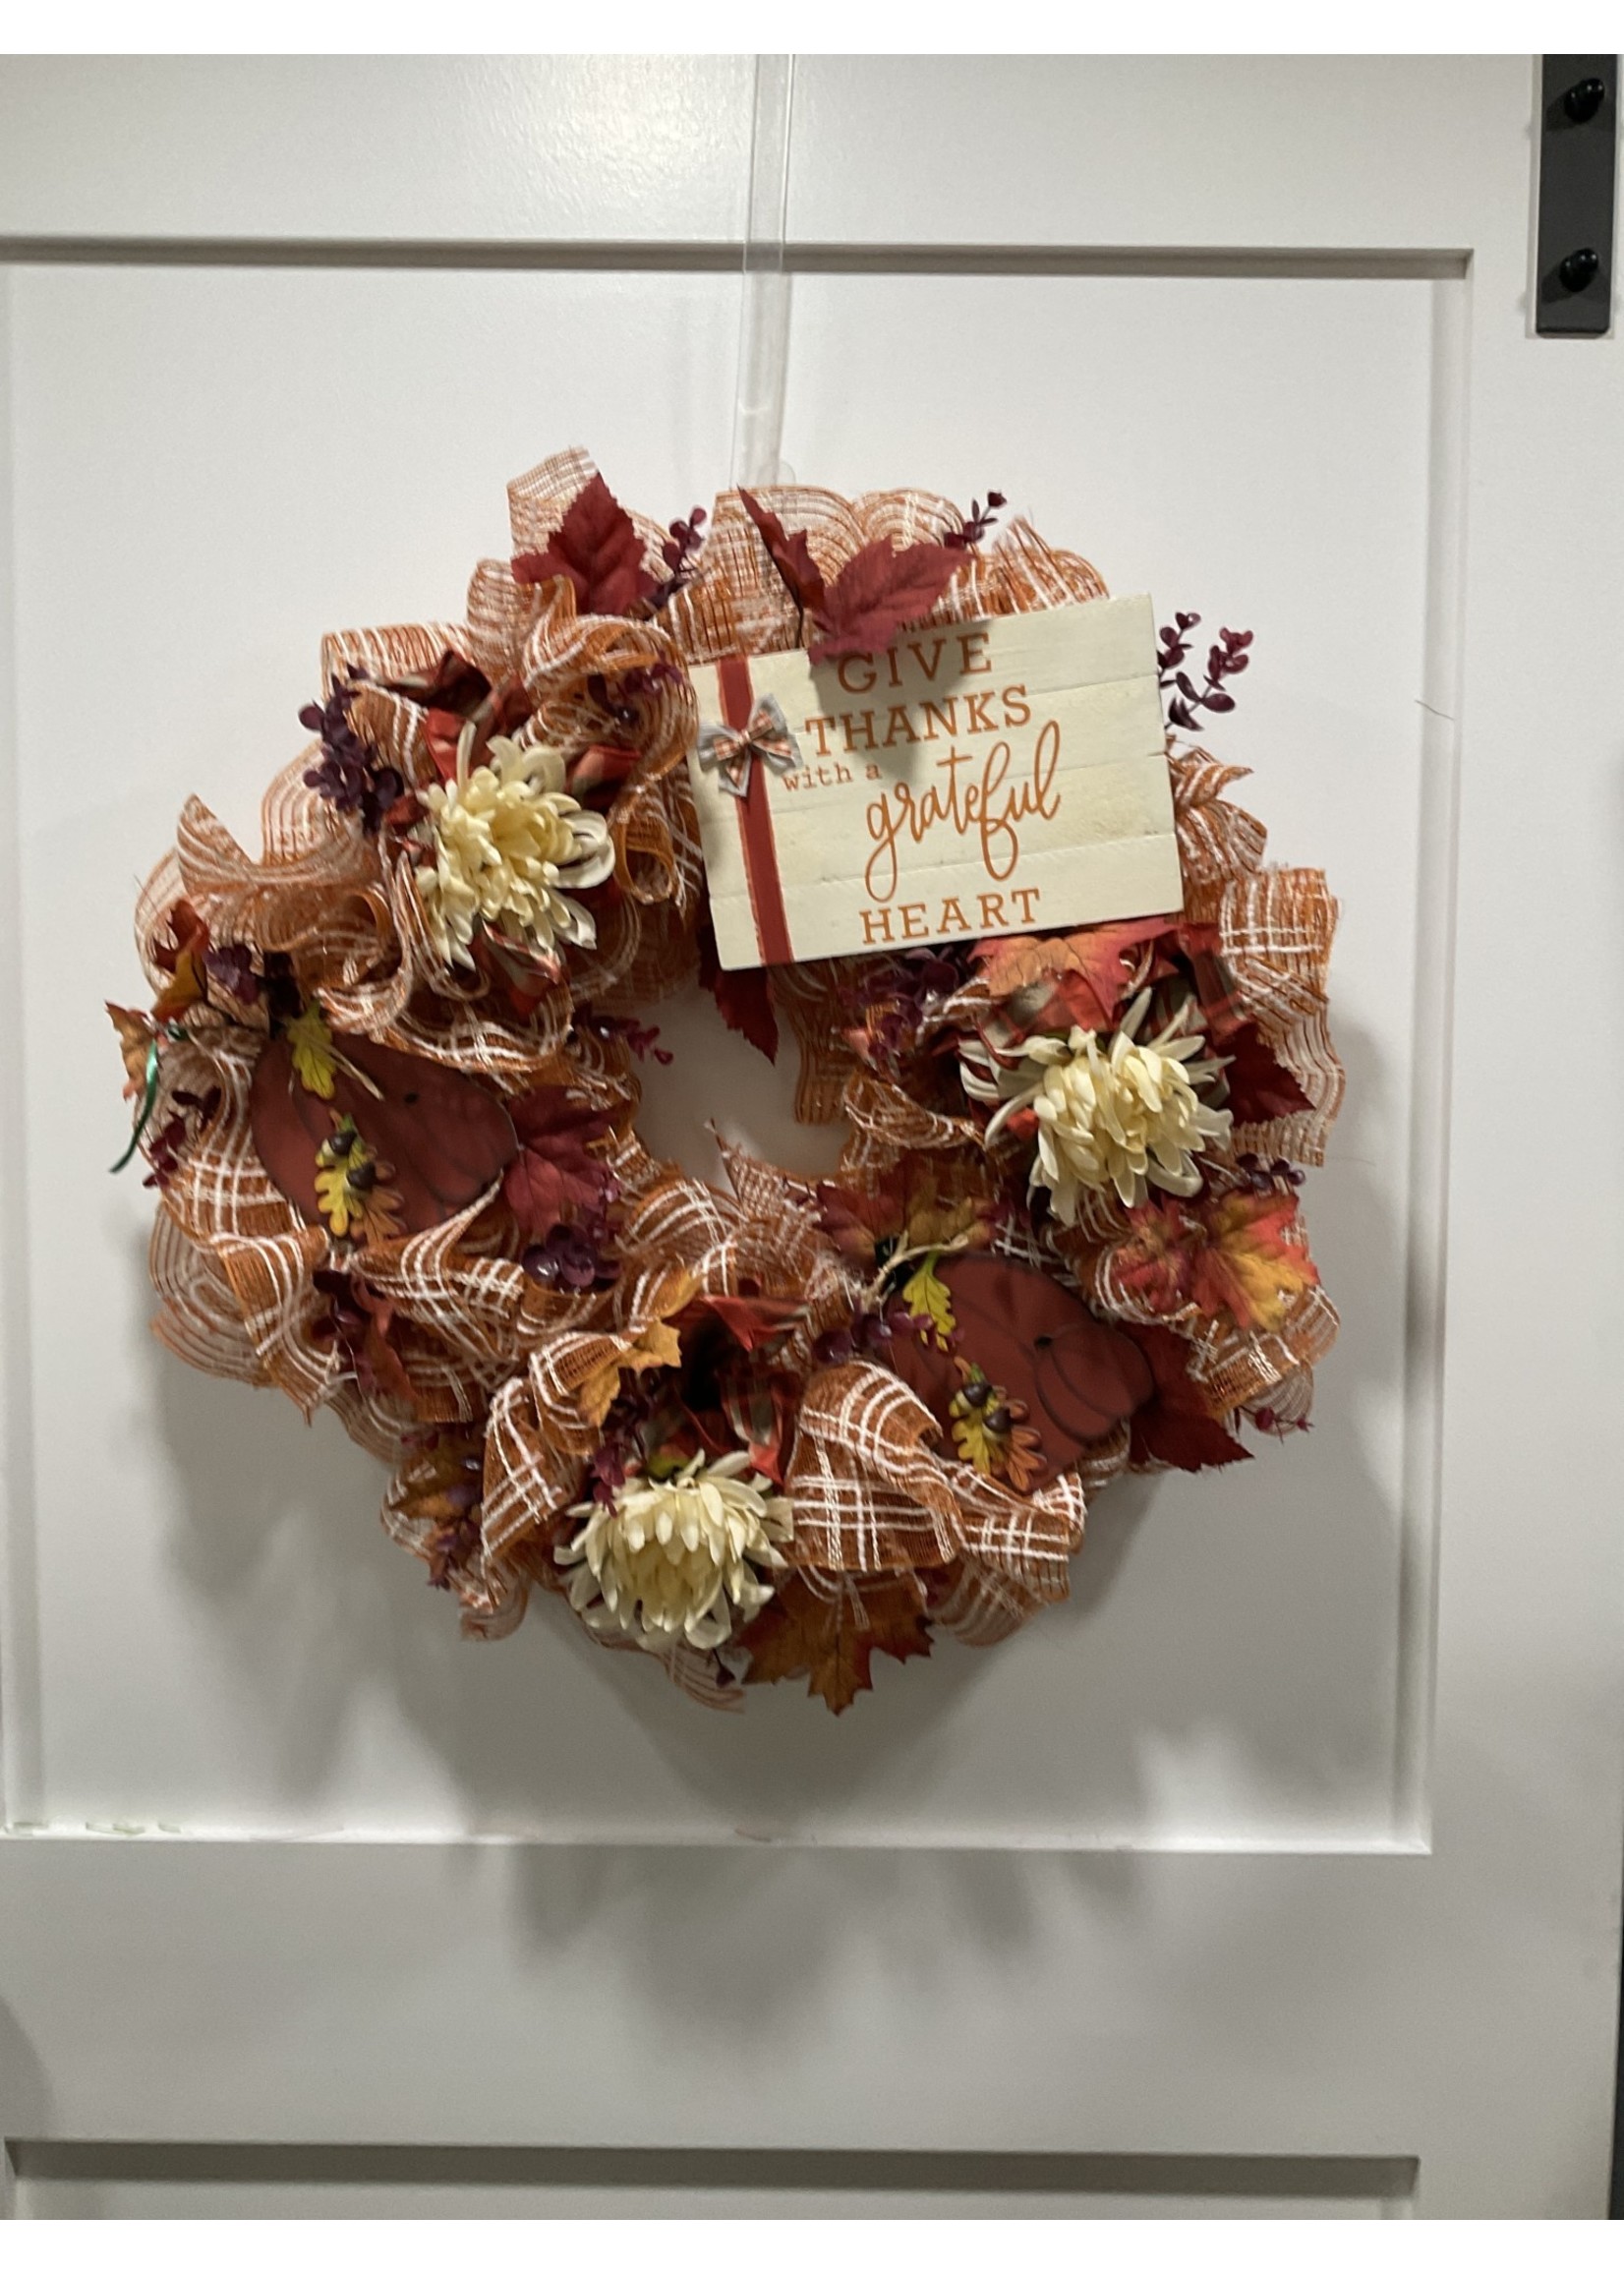 My New Favorite Thing Wreath Mesh 25 in-Orange and White "Give Thanks" w/Pumpkins and Leaves and Red Plaid Ribbon